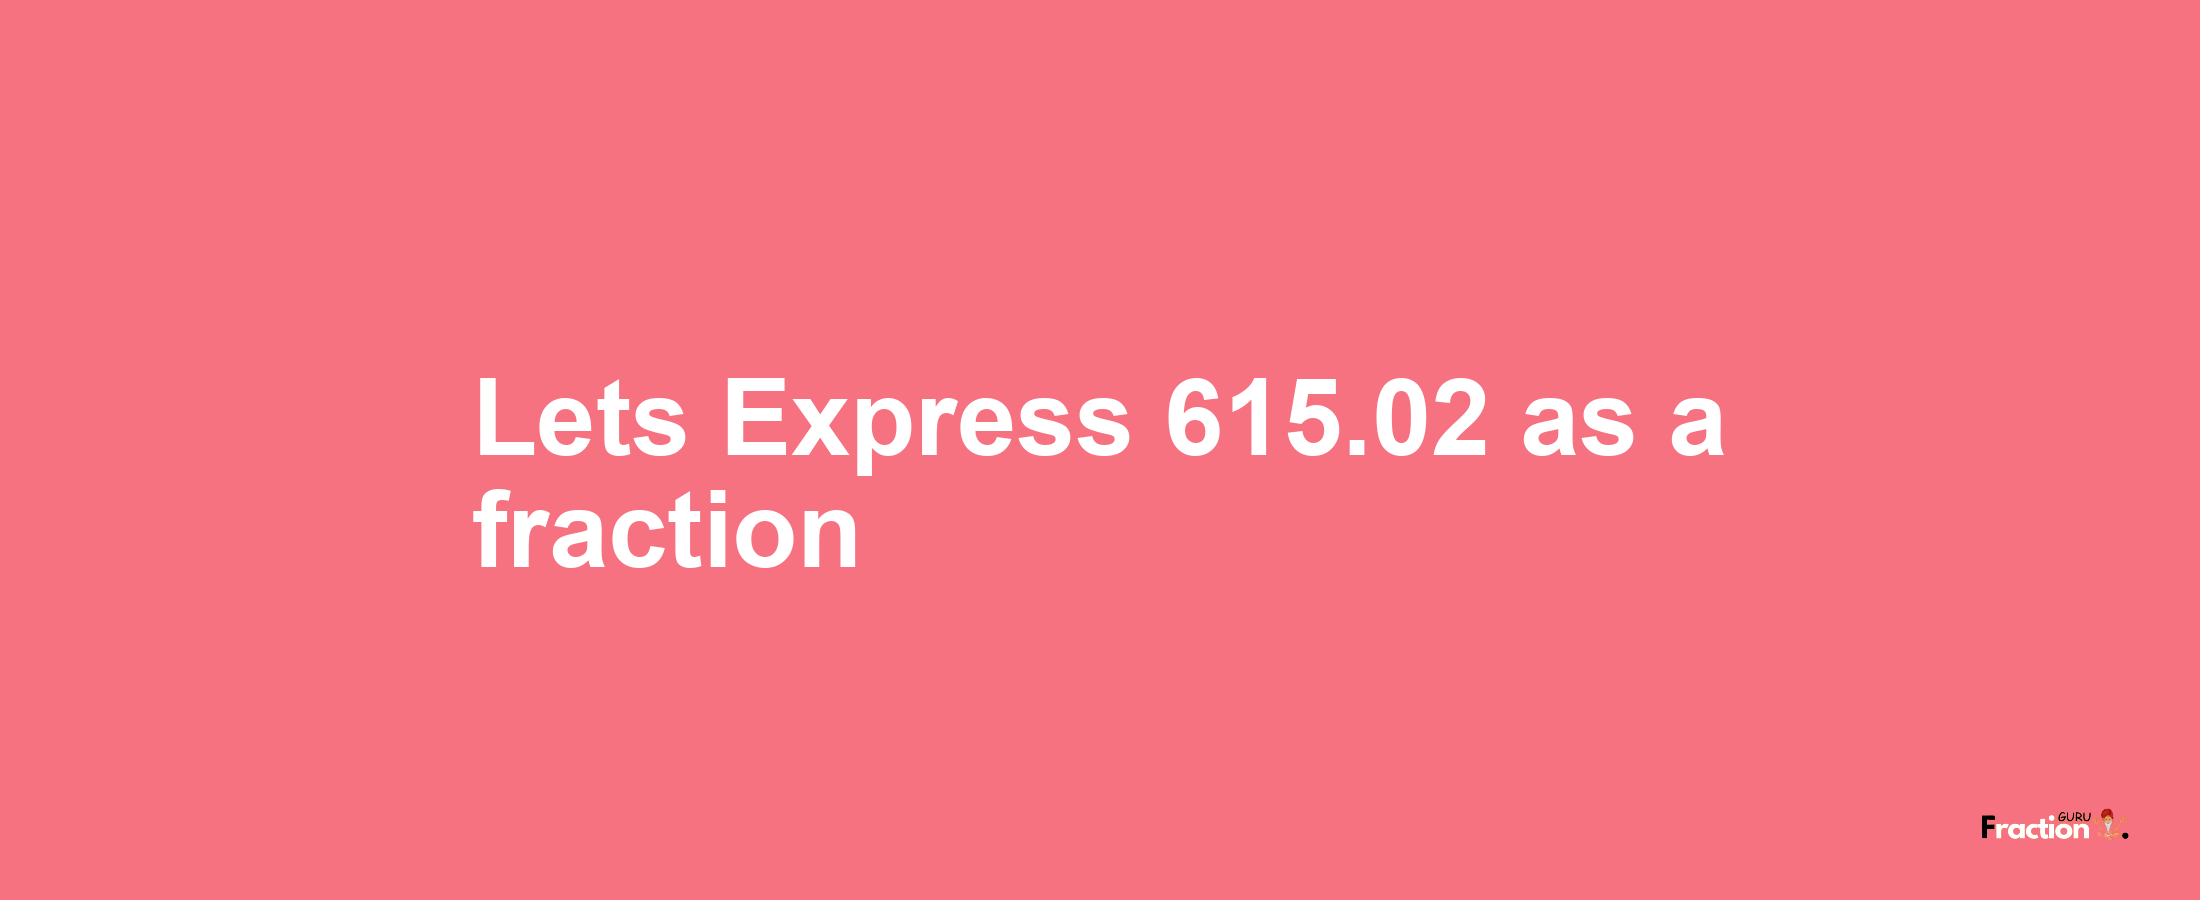 Lets Express 615.02 as afraction